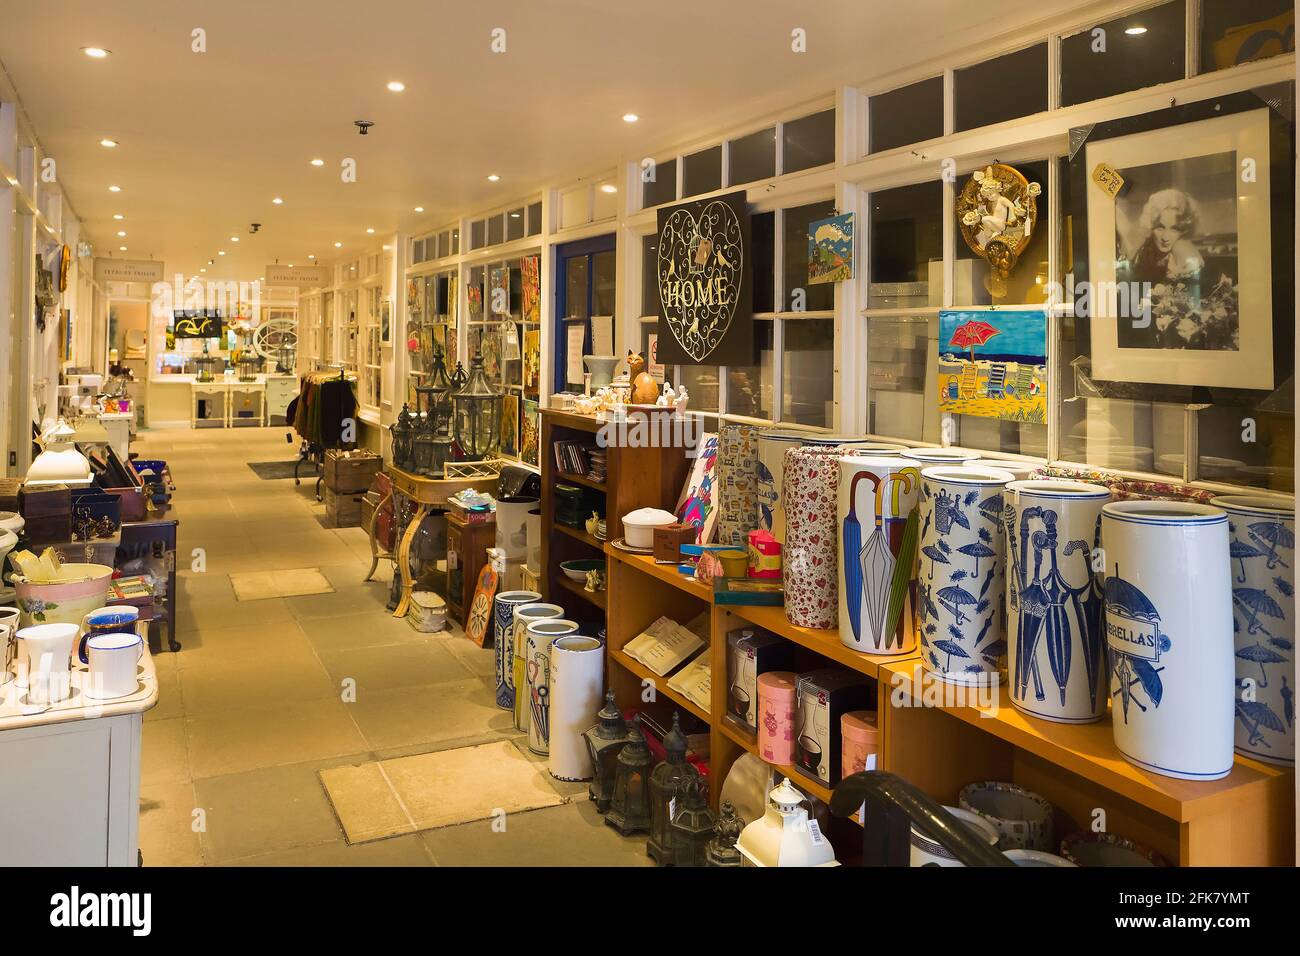 Interior of a shopping mall in Tetbury Gloucestershire UK showing new homeware products including umbrella stands Stock Photo